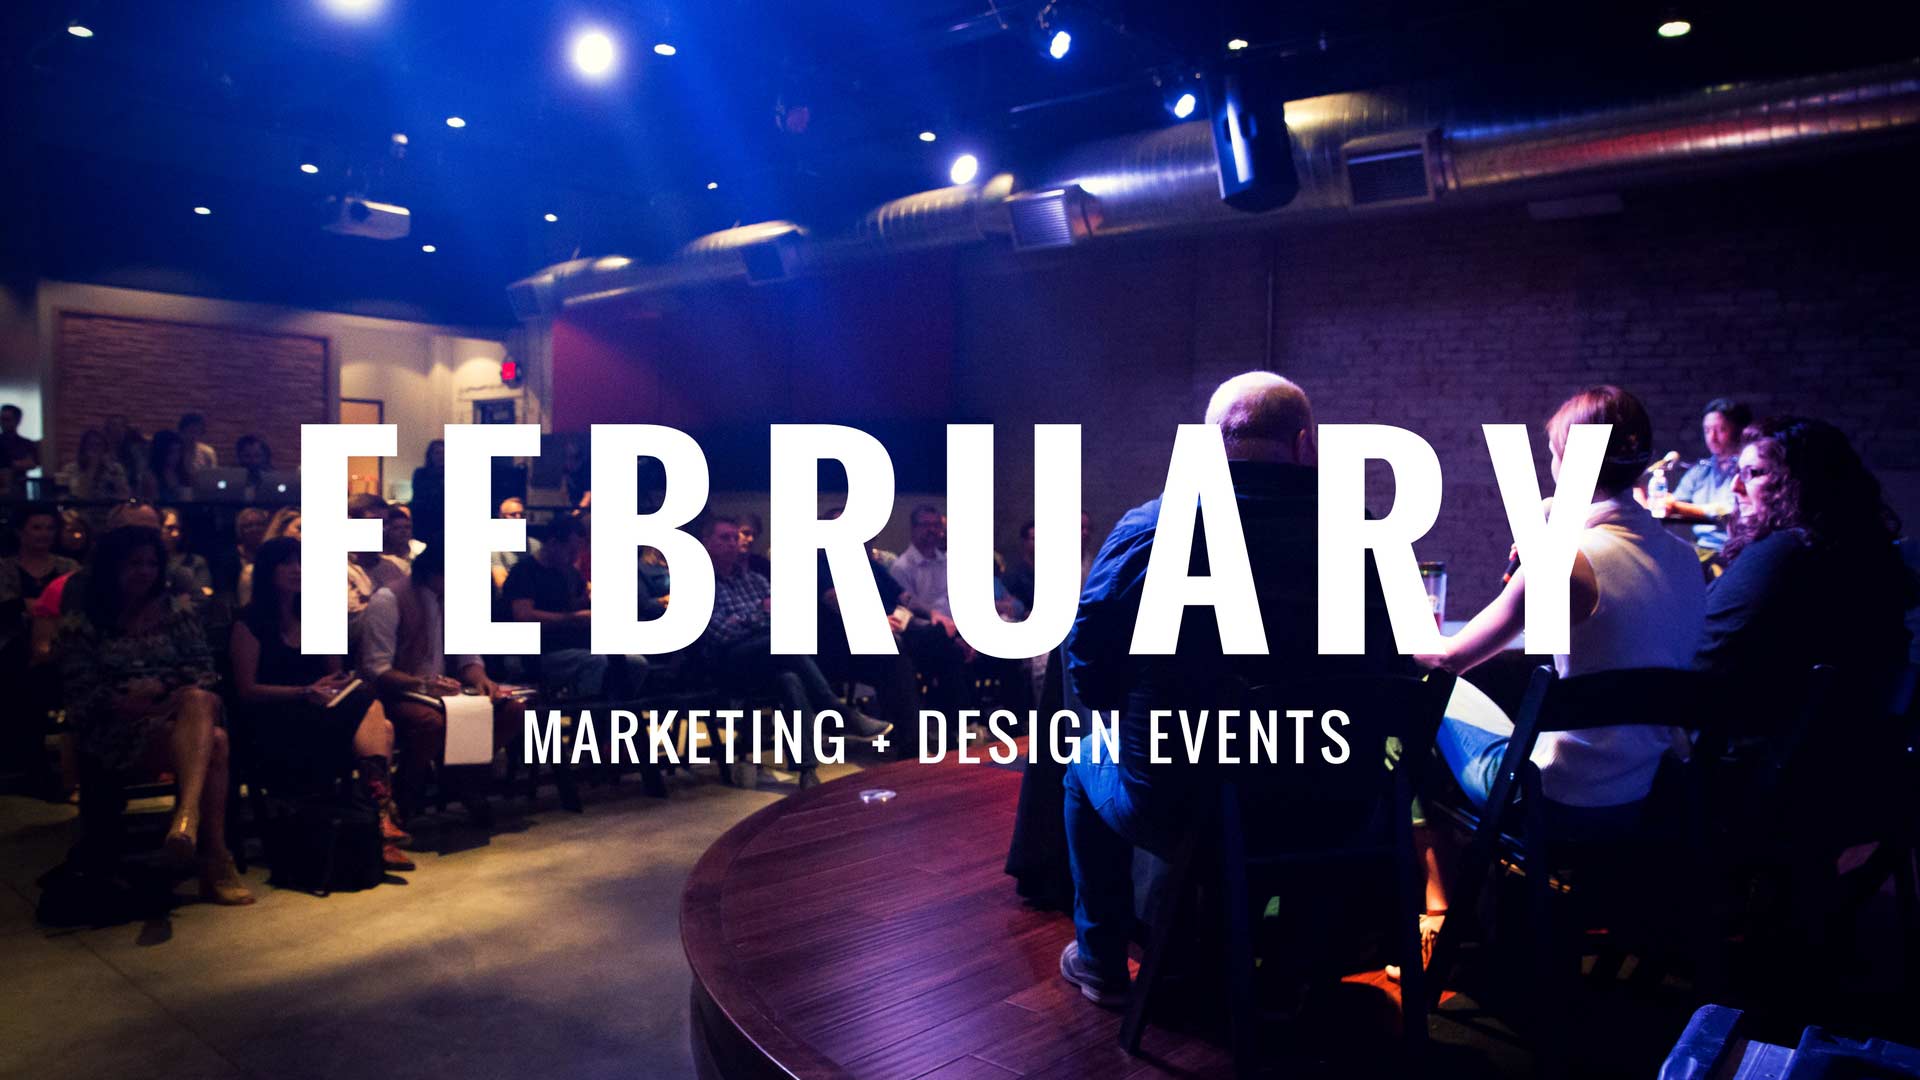 February 2017 Marketing Design Events in St. Louis